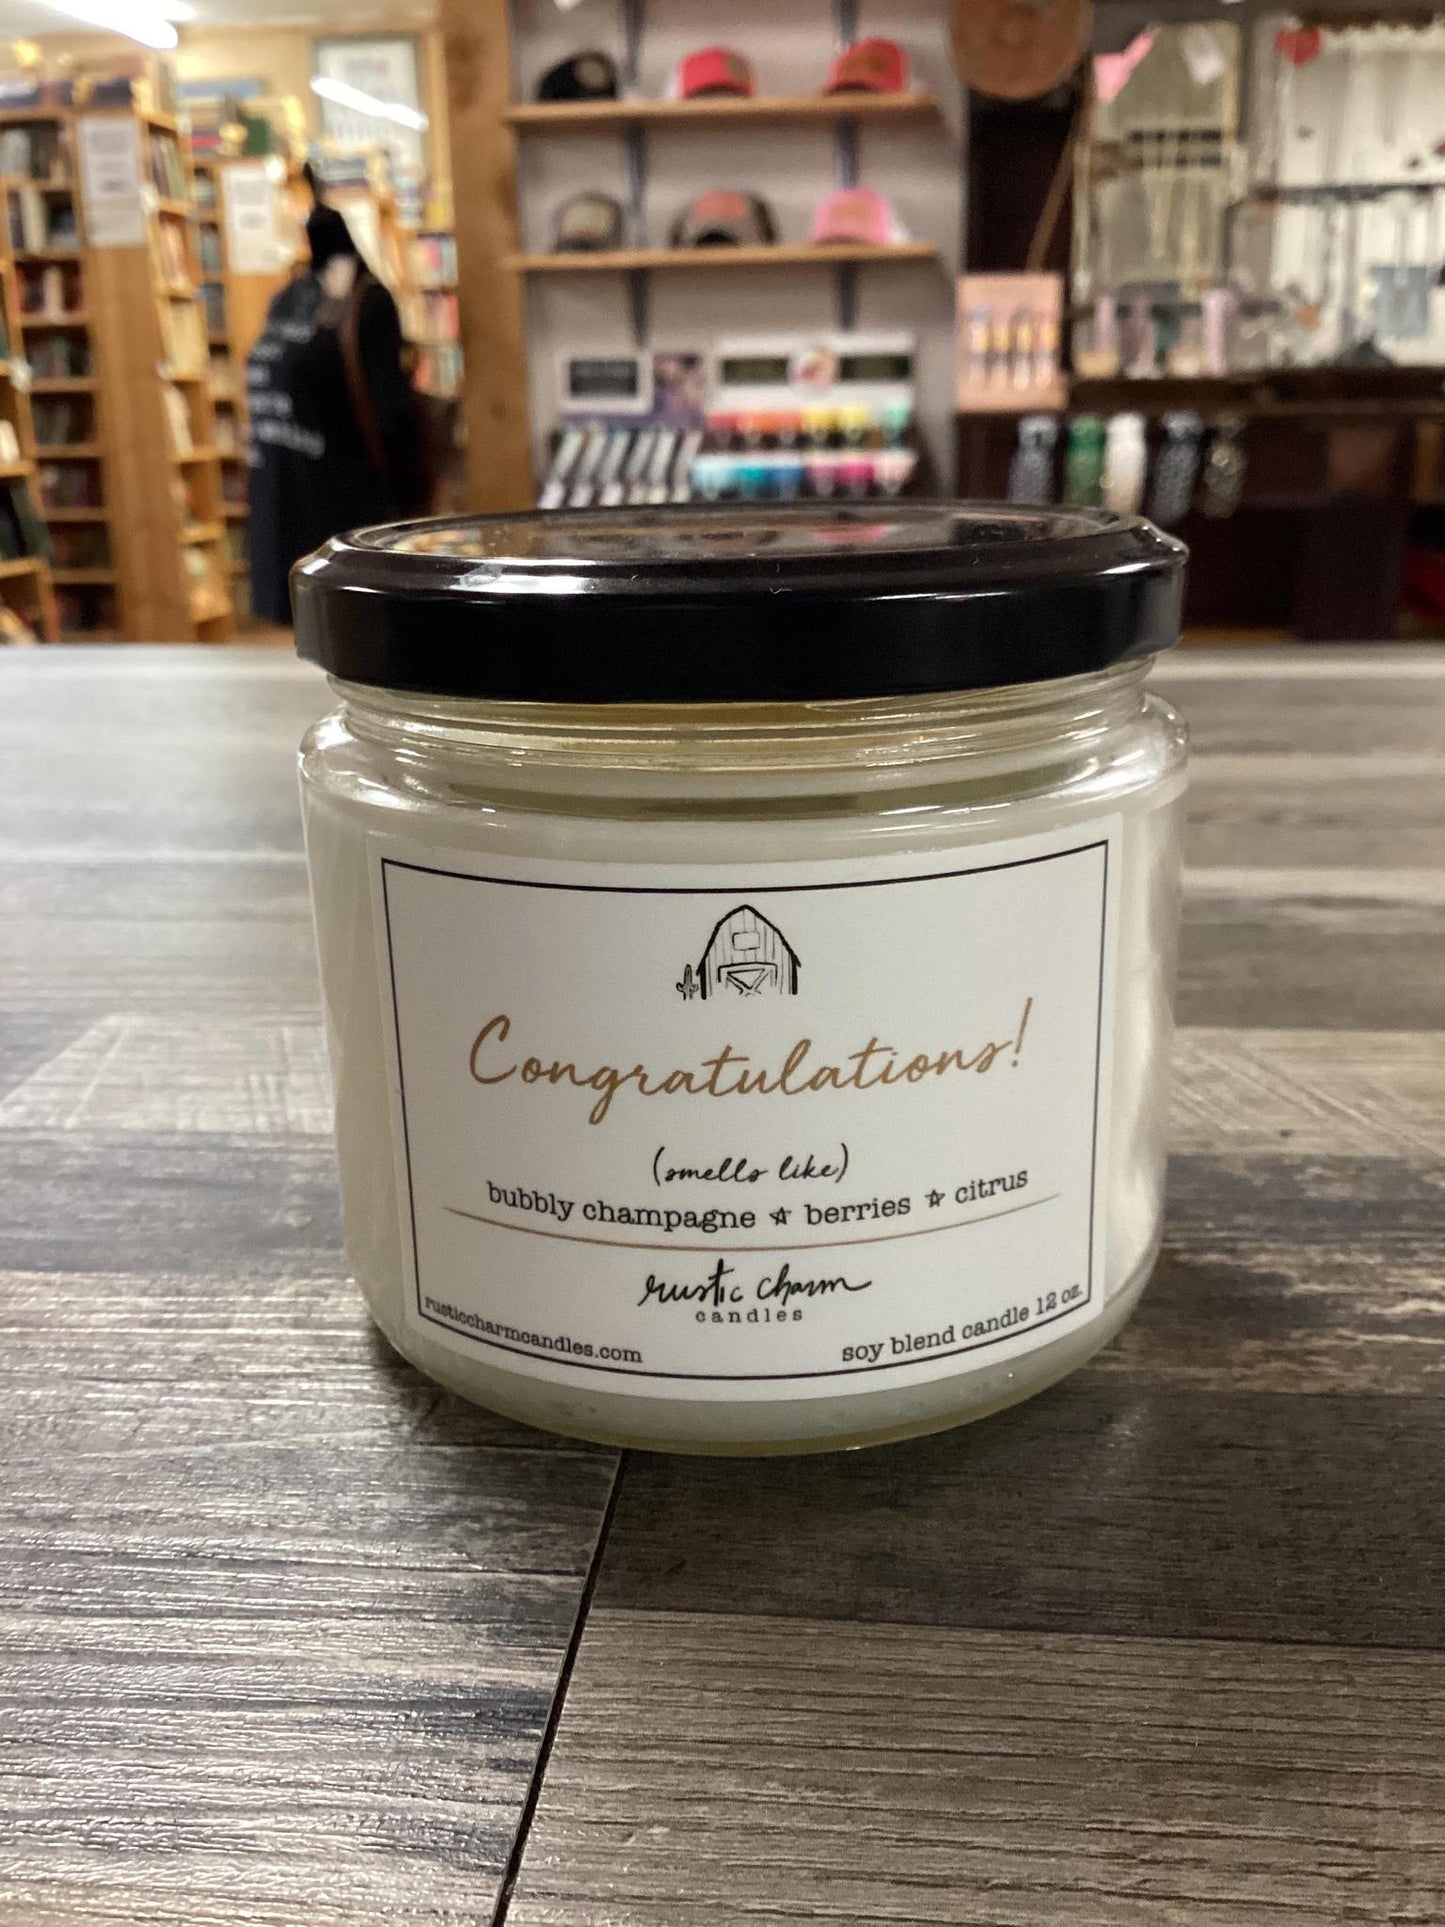 "Congratulations!" Candle -Rustic Charm